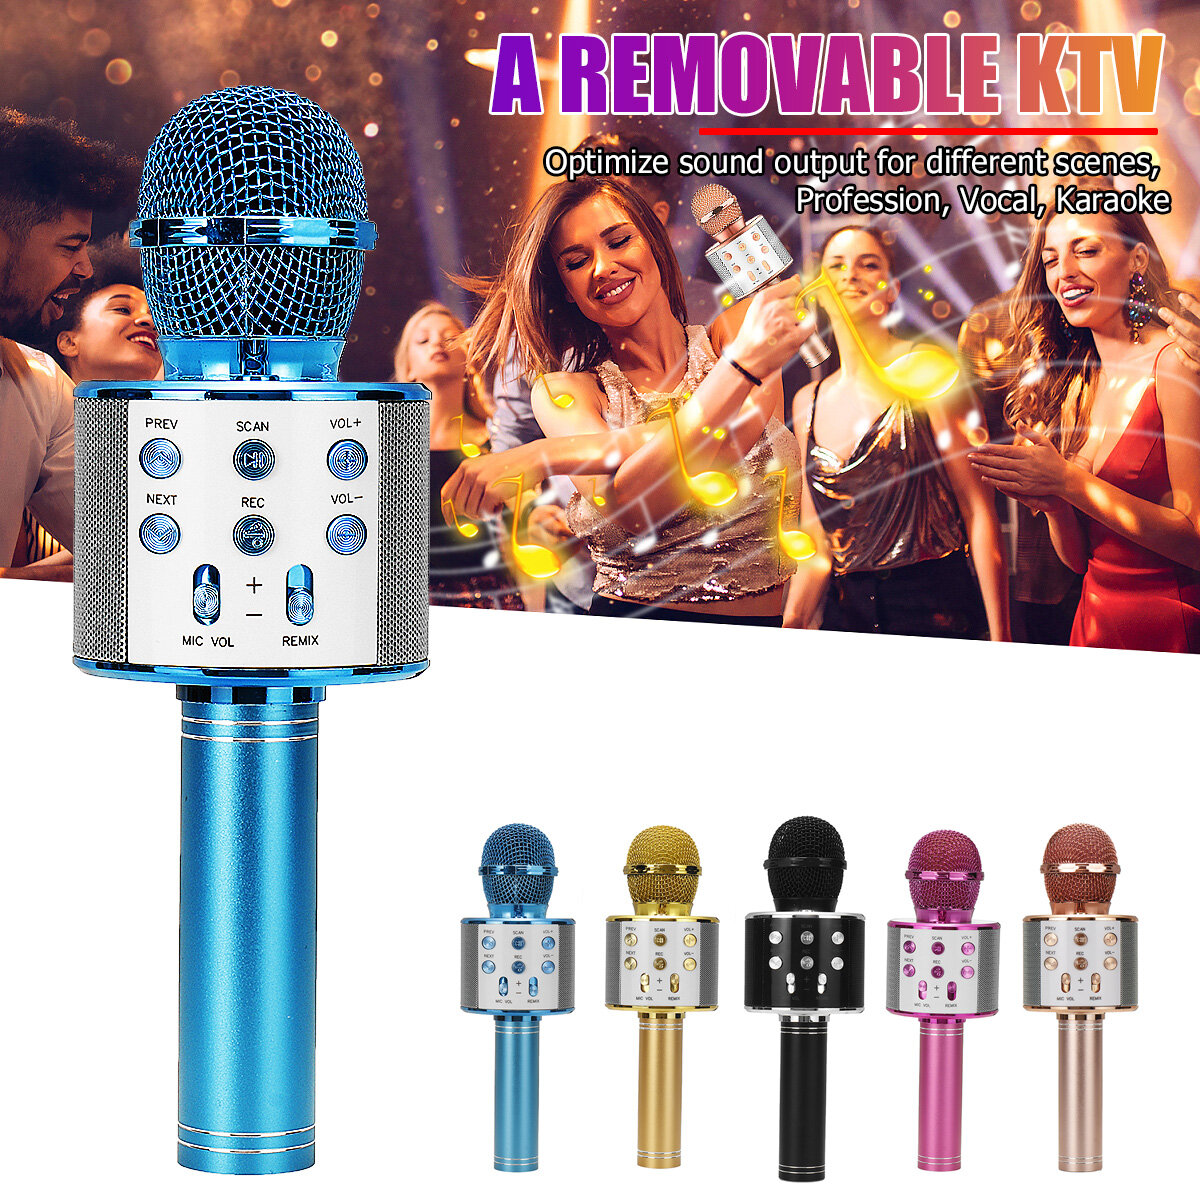 Bakeey 858 Wirelss bluetooth Microphone DSP Noise Reduction Karaoke Mic Recorder HIFI Stereo Speaker Portable Handheld Singing Player for KTV Party COD